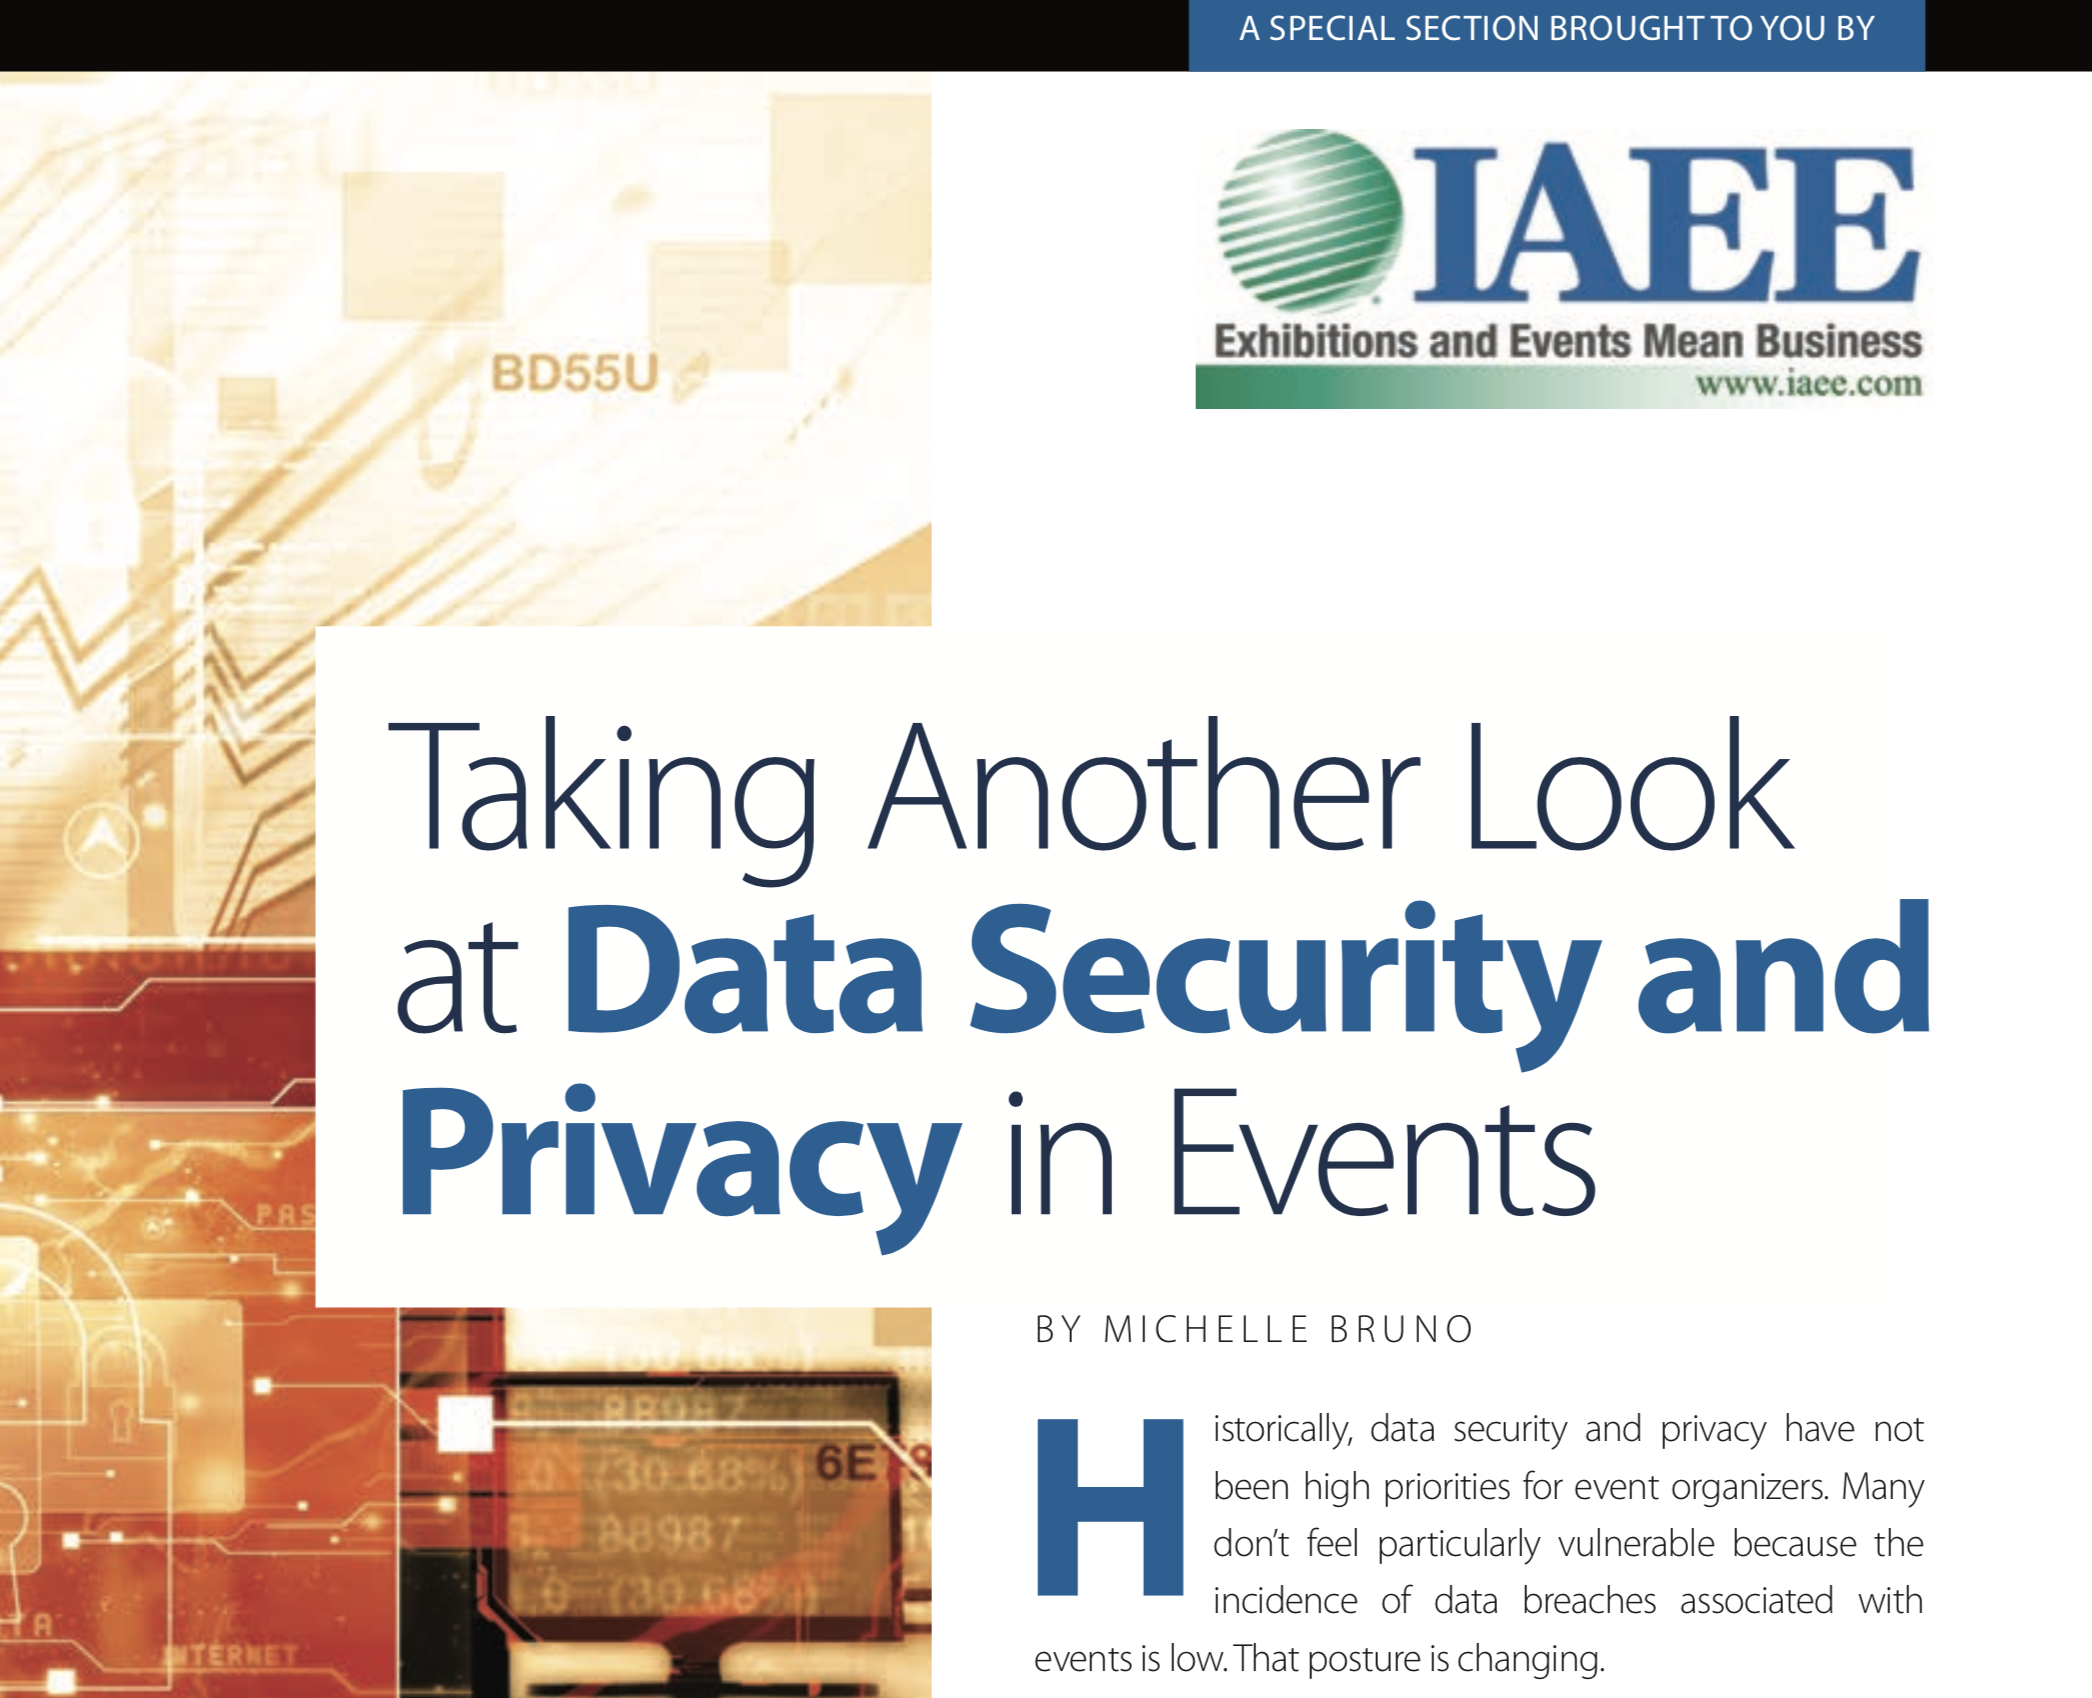 IAEE - Taking Another Look at Data Security and Privacy in Events